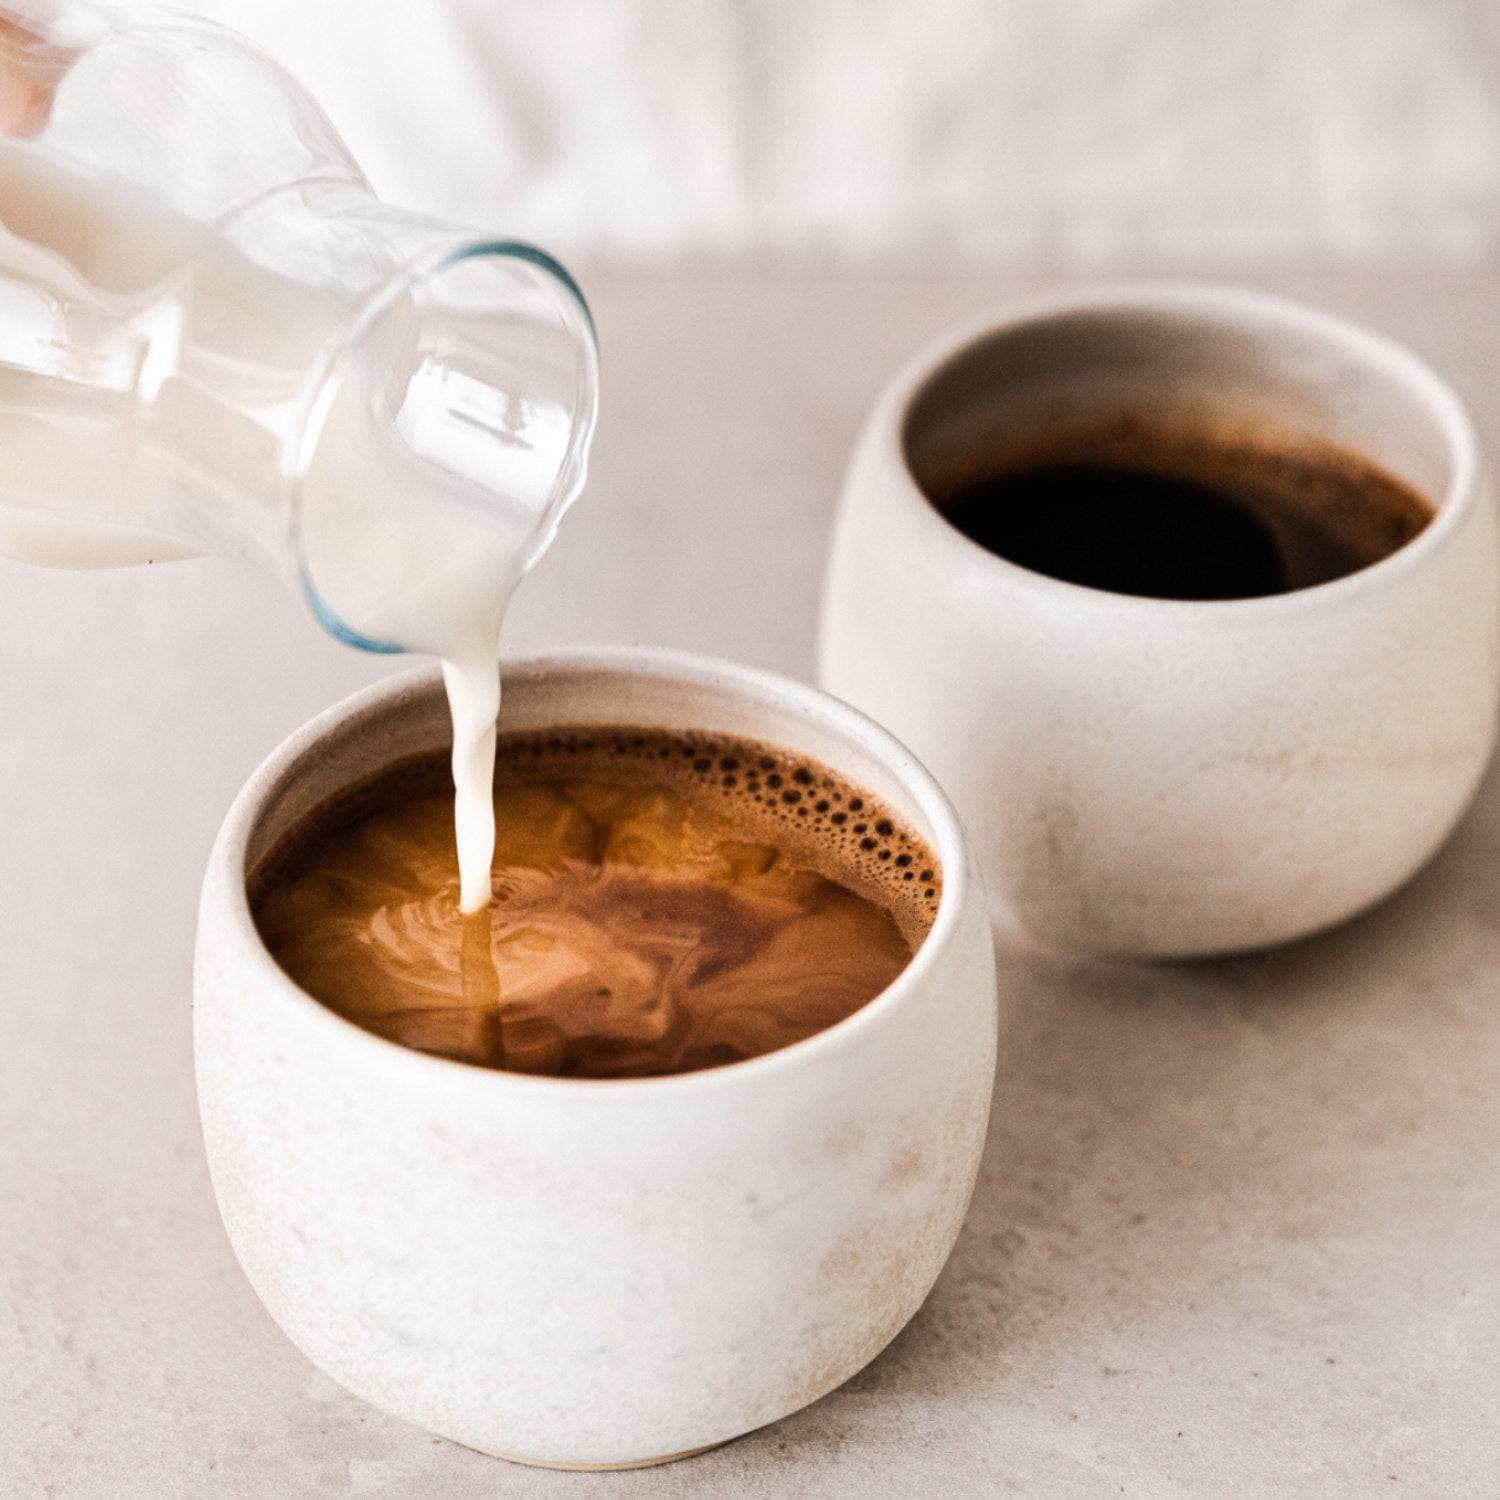 https://cdn.outsideonline.com/wp-content/uploads/2023/03/coffee-with-dairy-1.jpg